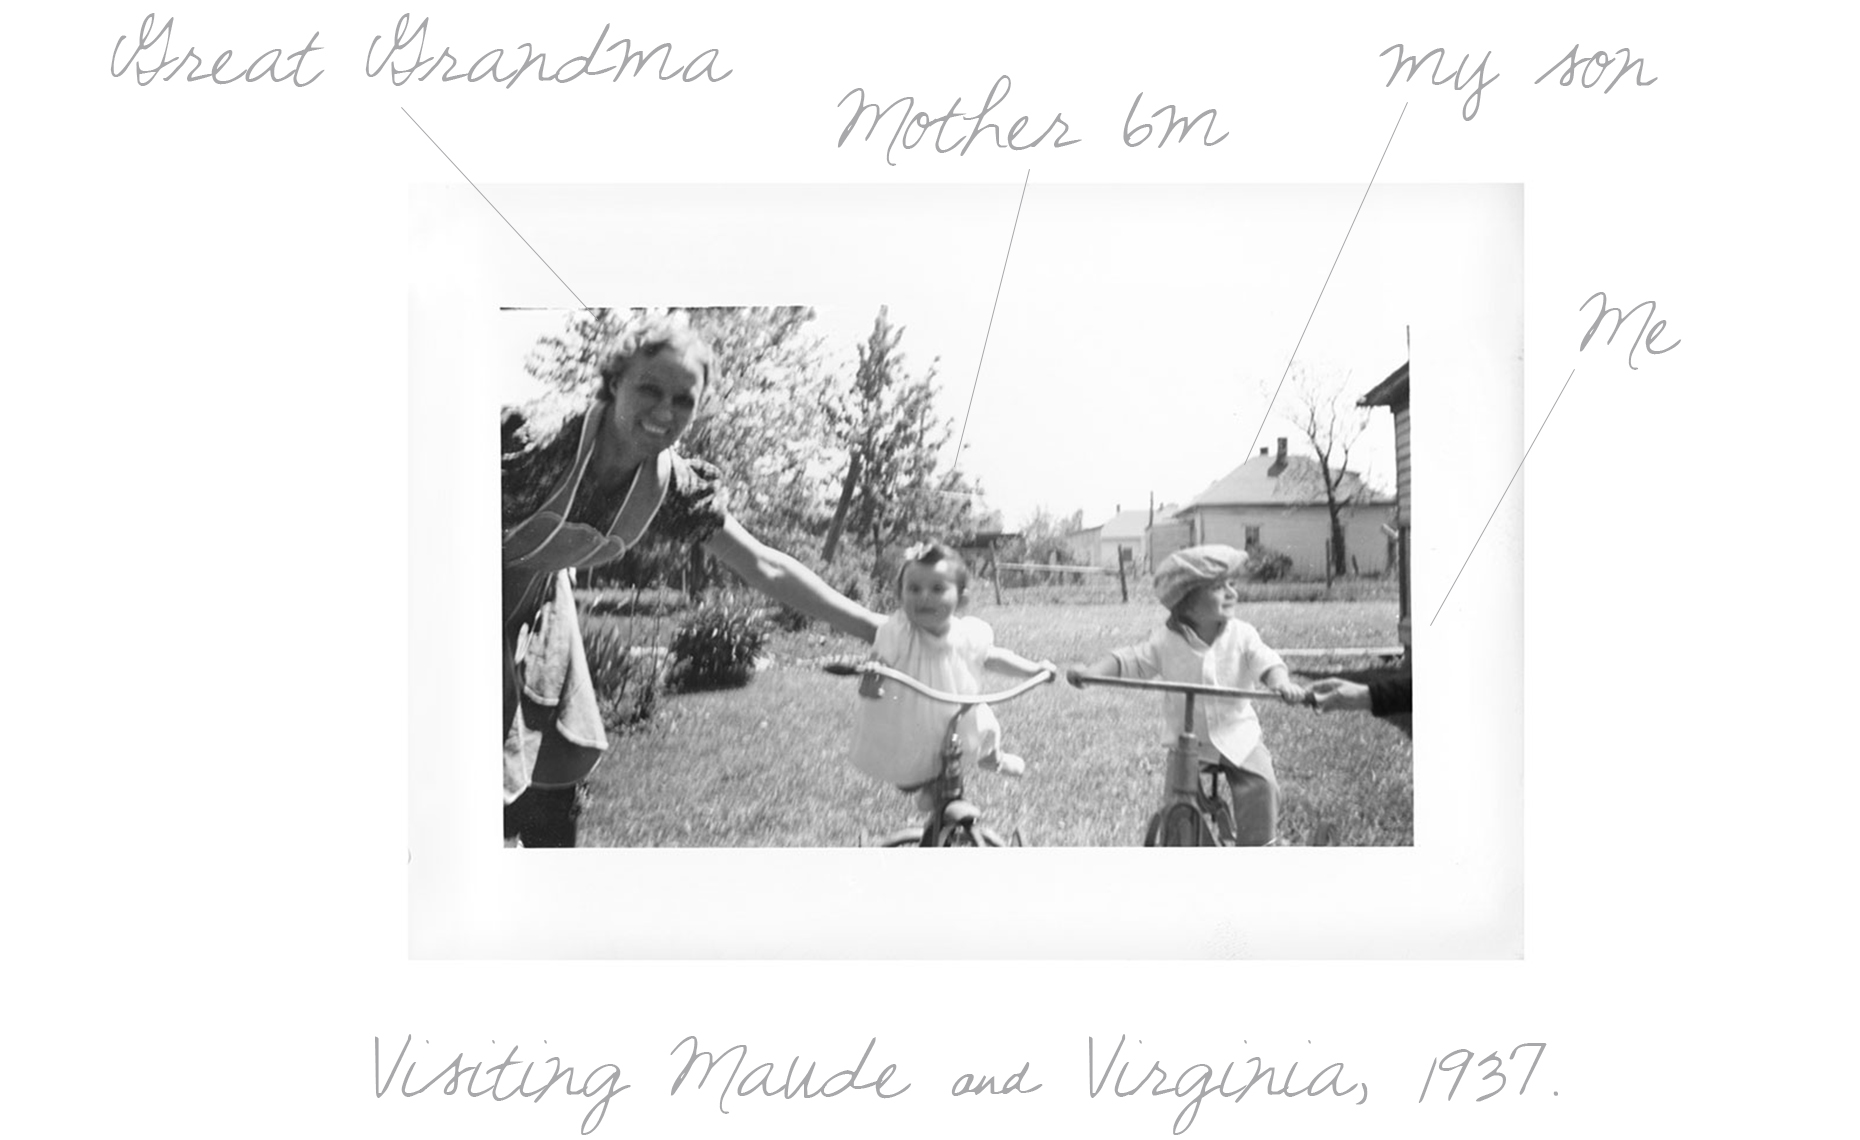 Visiting Maude and Ginger Trike, 1937